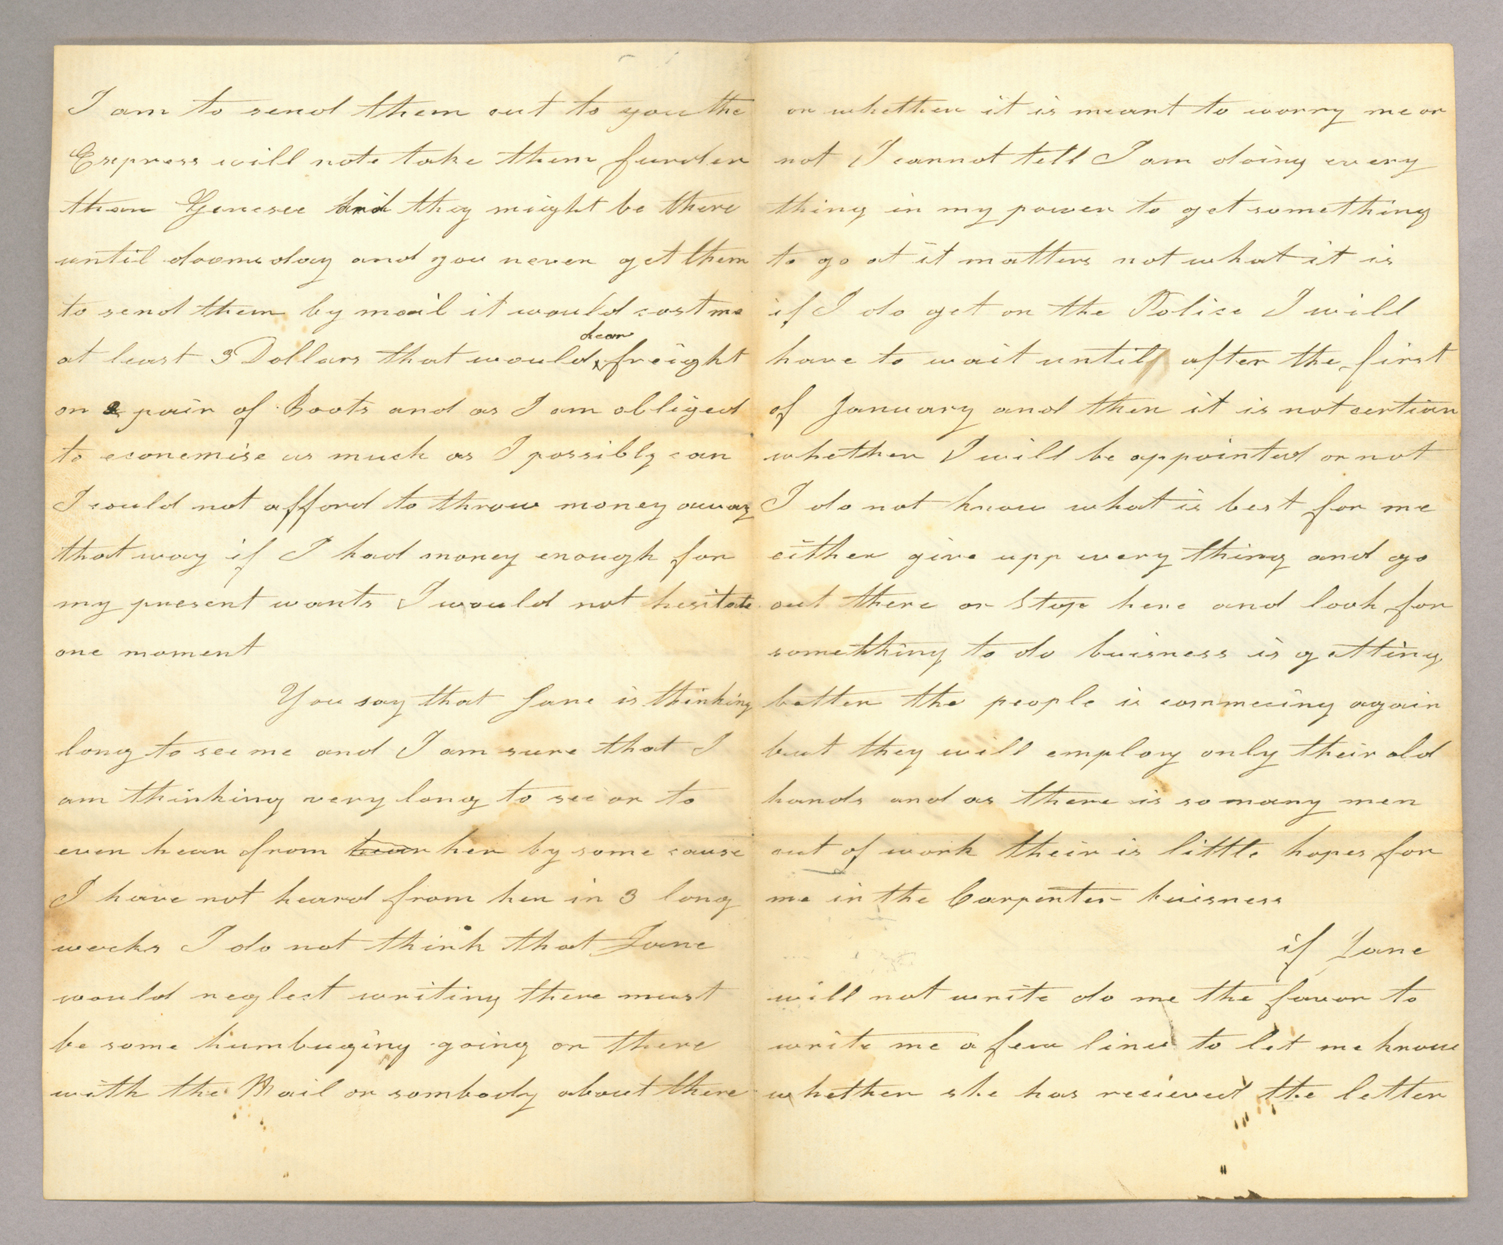 Letter. Robert McCormick, New York, New York, to "Dear Sir" [John E. Brownlee?], n. p., Pages 2-3